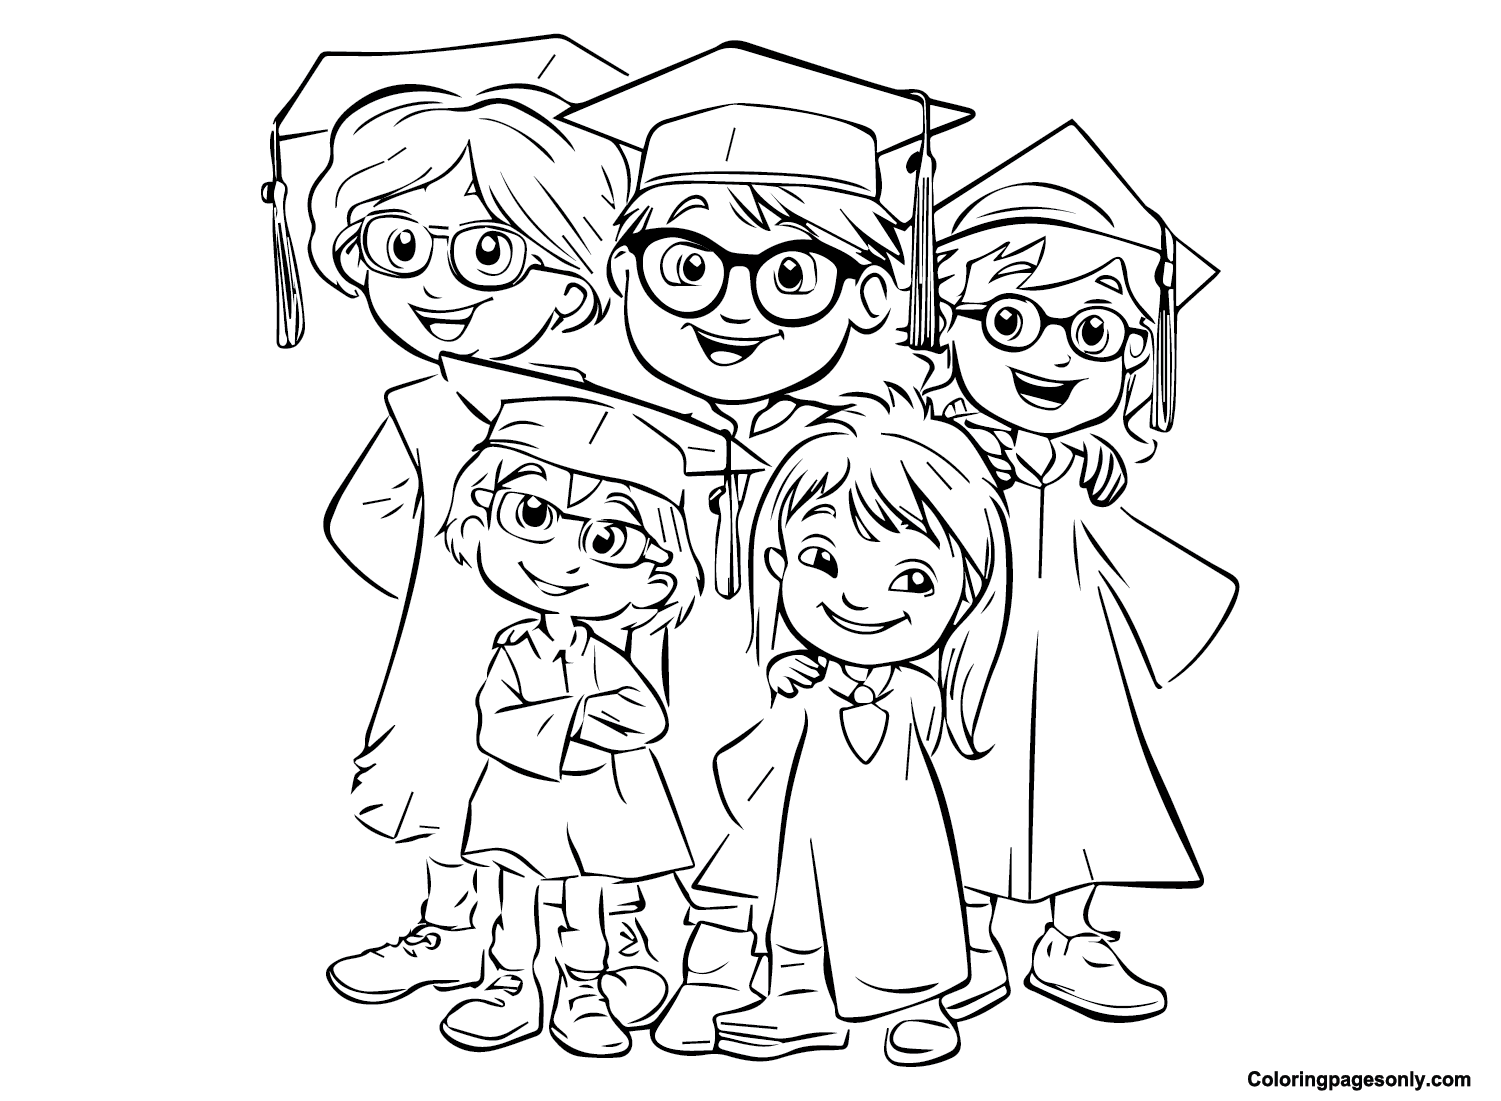 Activities Last Day of School Coloring Page